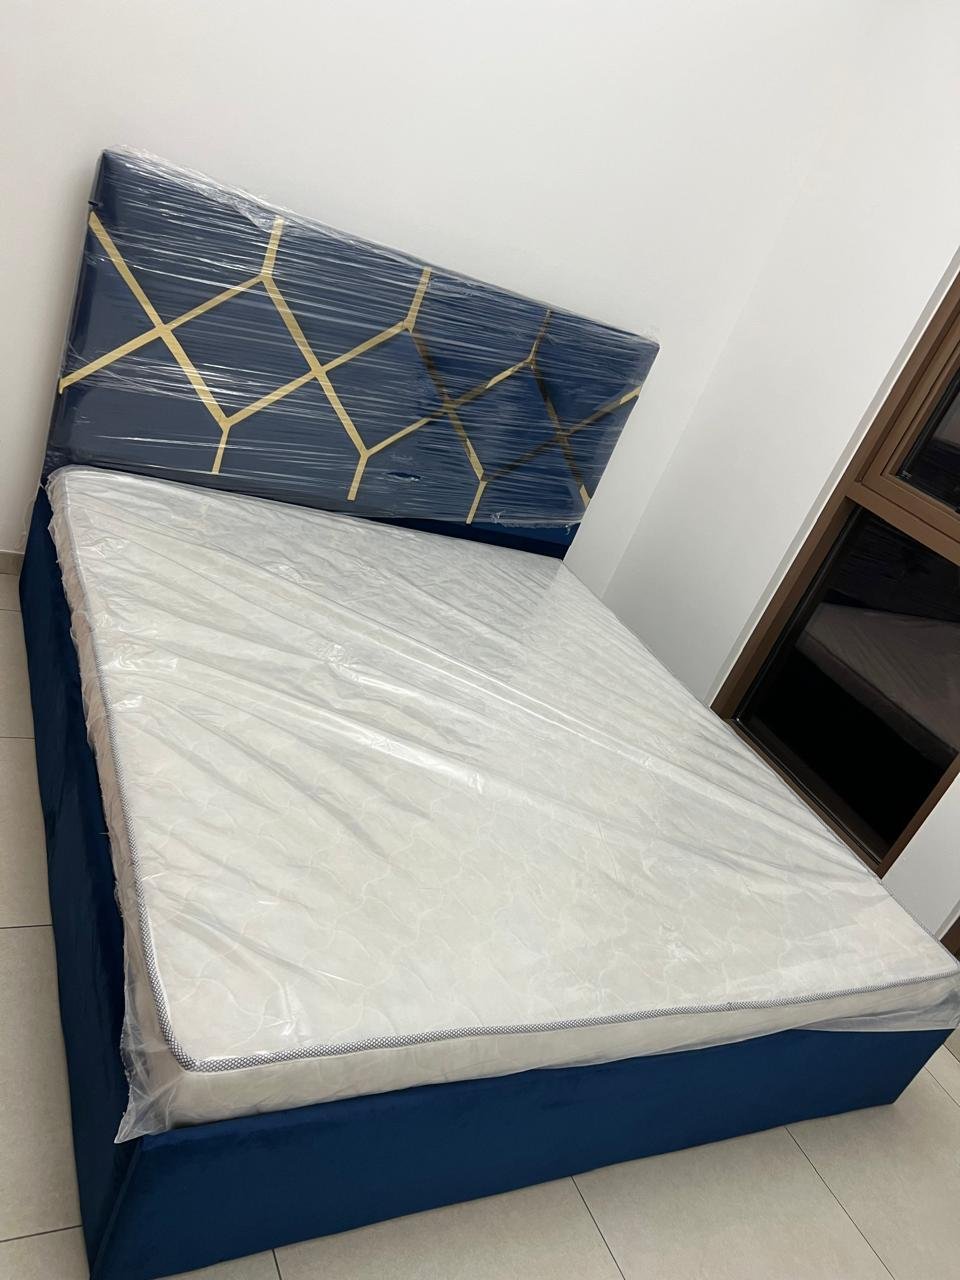 Bed For Sale In Abu Dhabi